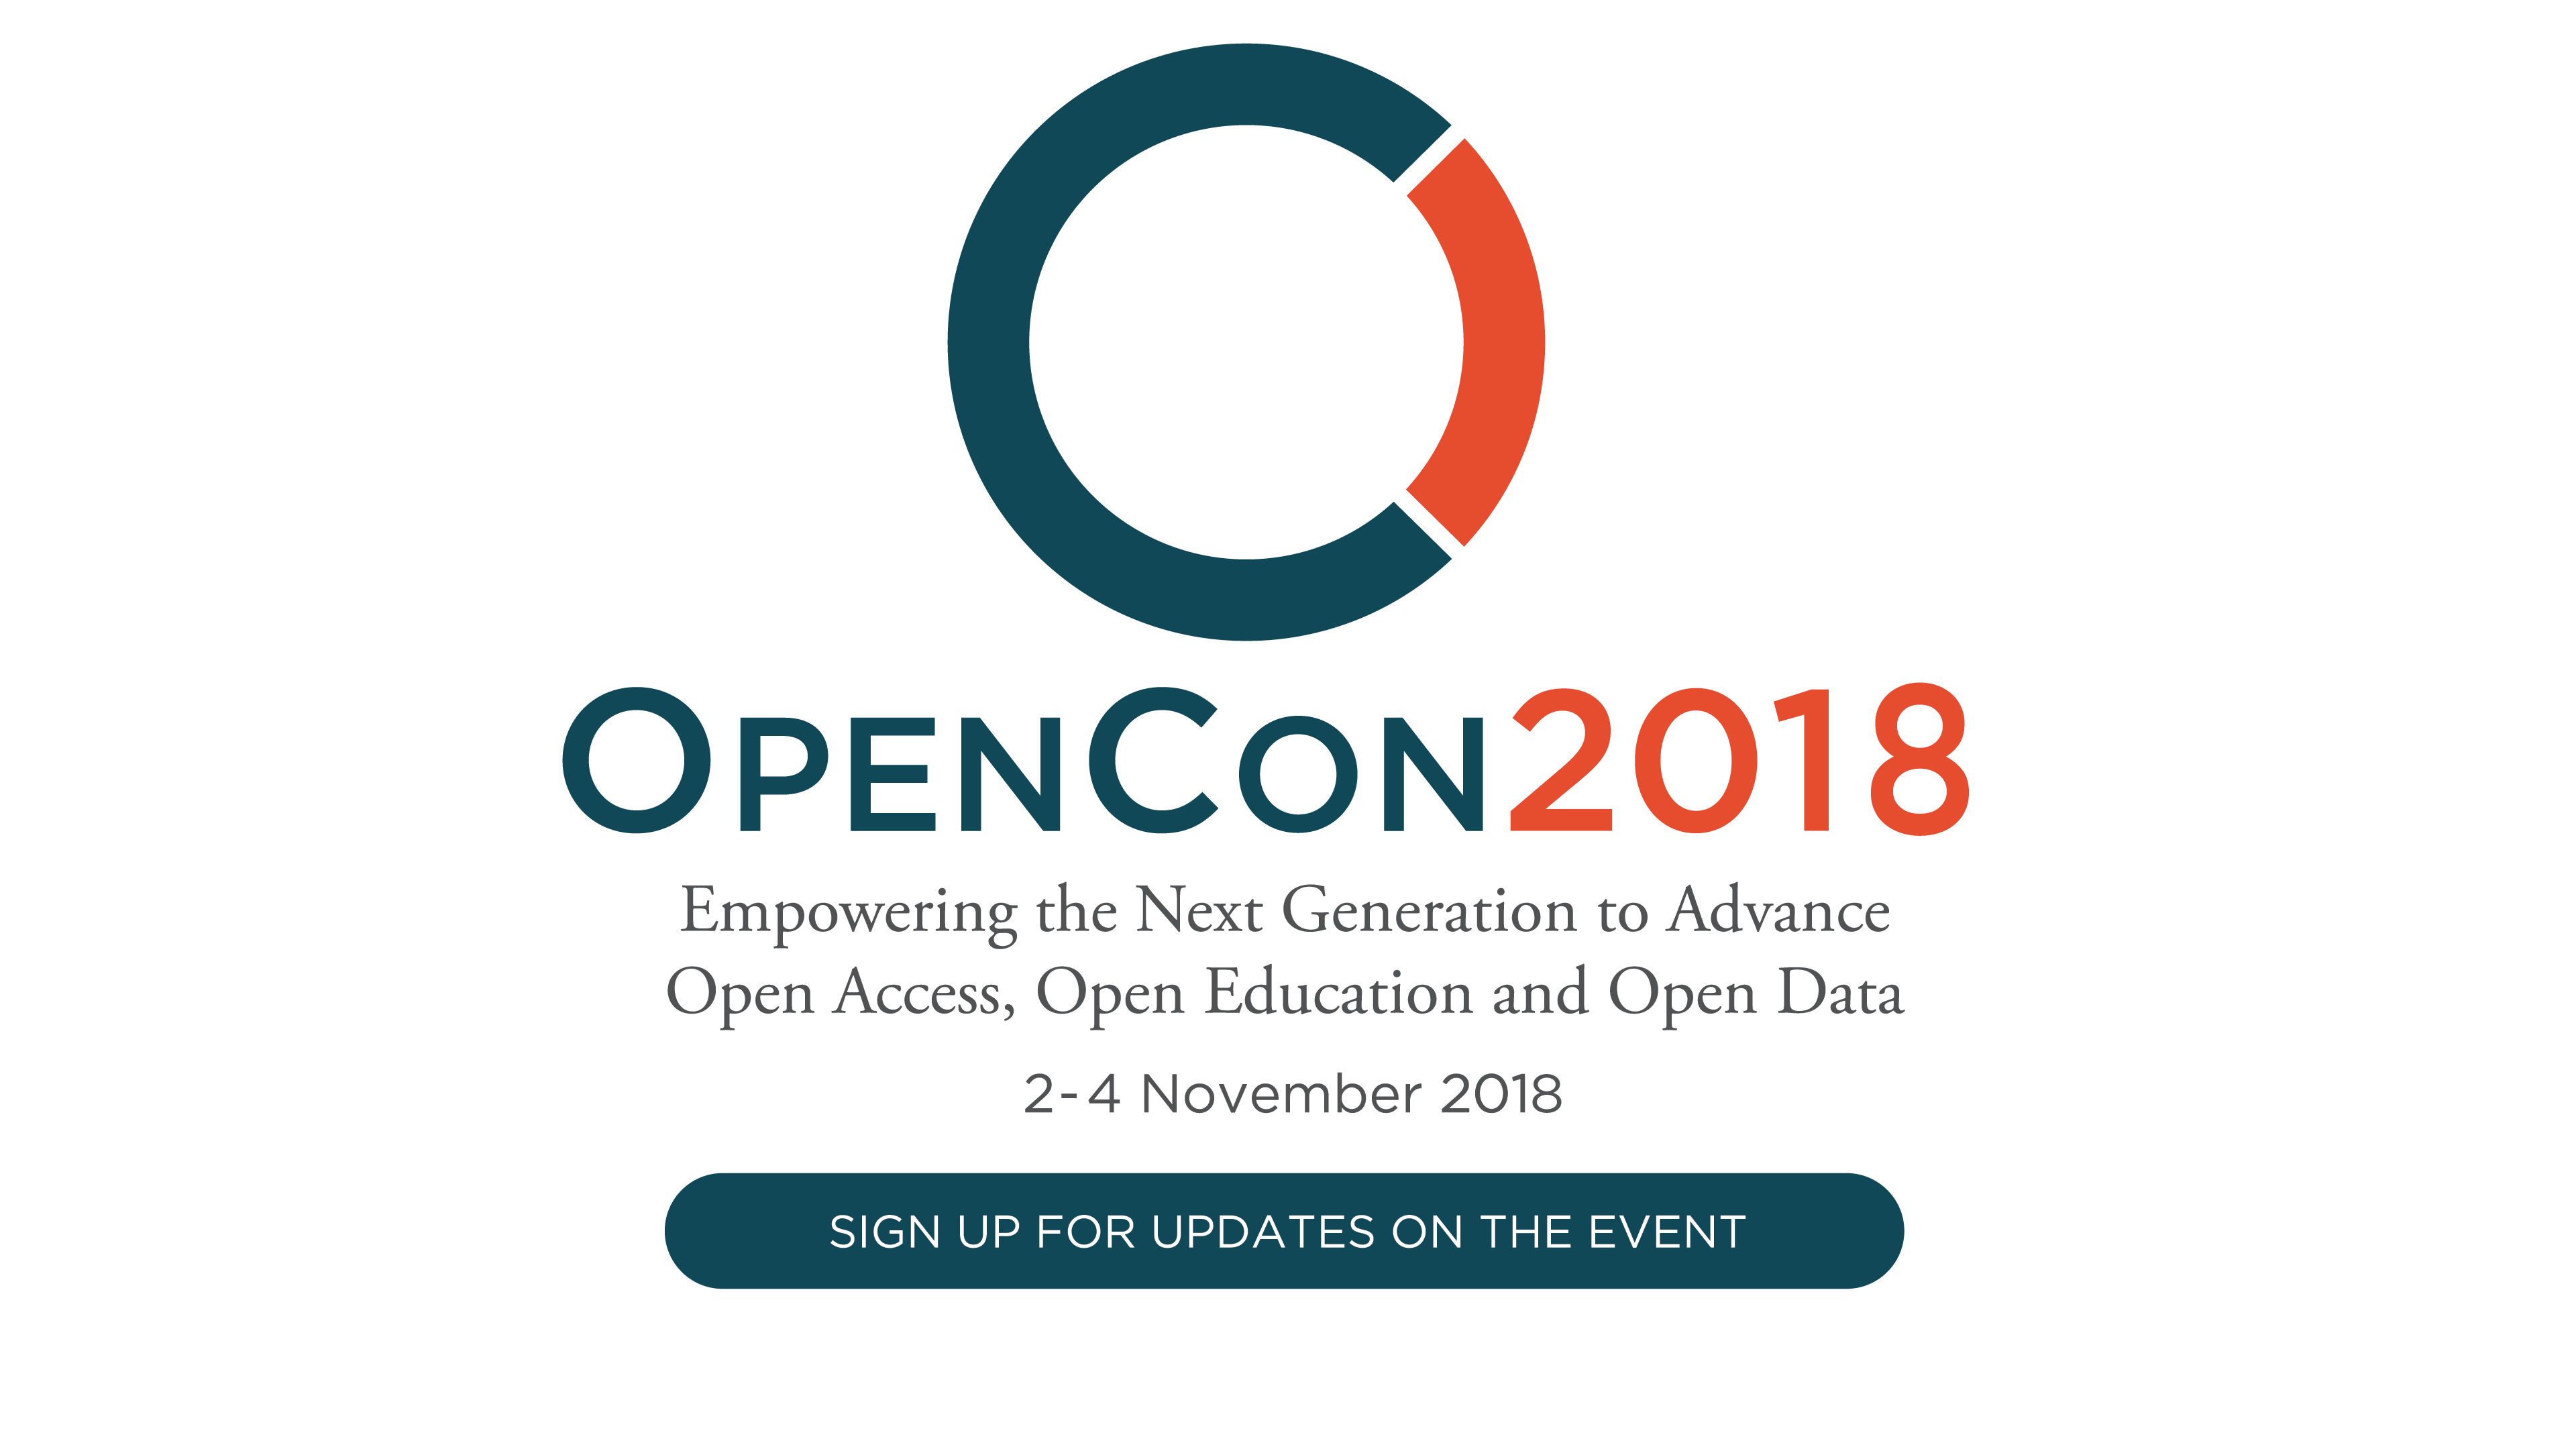 Logo Text: Empowering the Next Generation to Advance Open Access, Open Education, and Open Data